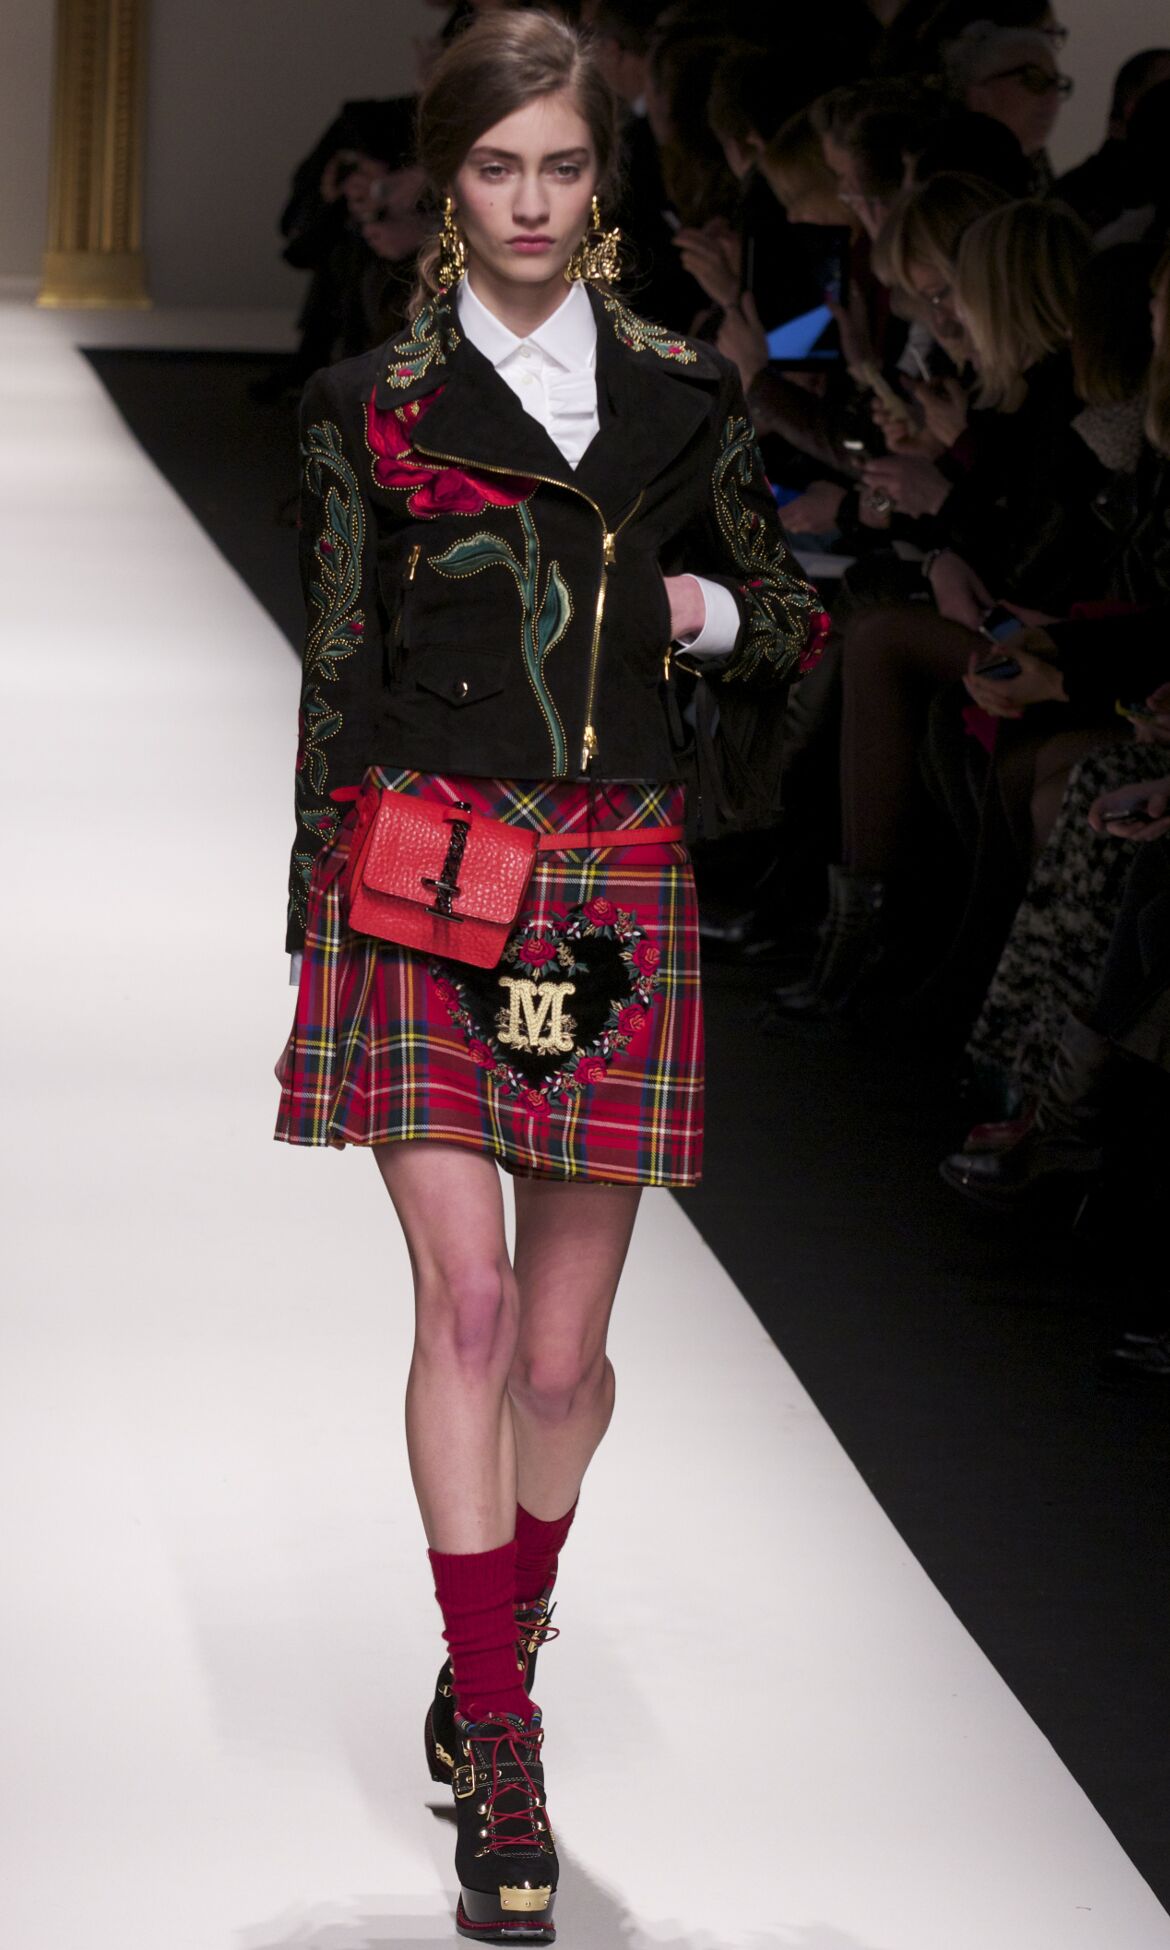 MOSCHINO FALL WINTER 2013-14 WOMEN'S COLLECTION | The Skinny Beep